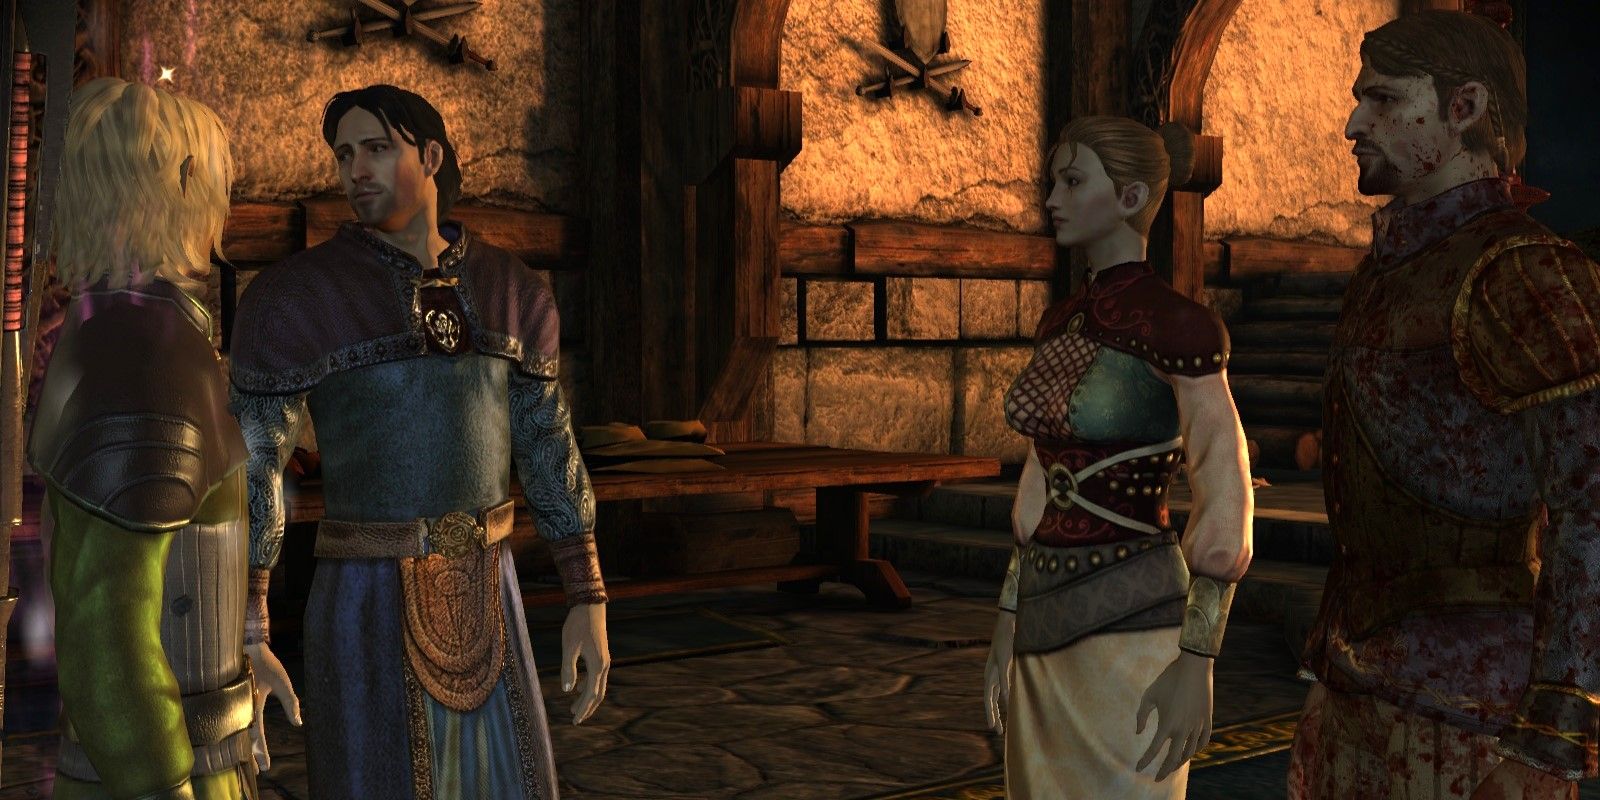 The Warden, Jowan, Bann Teagan, and Isolde discuss options in Redcliffe